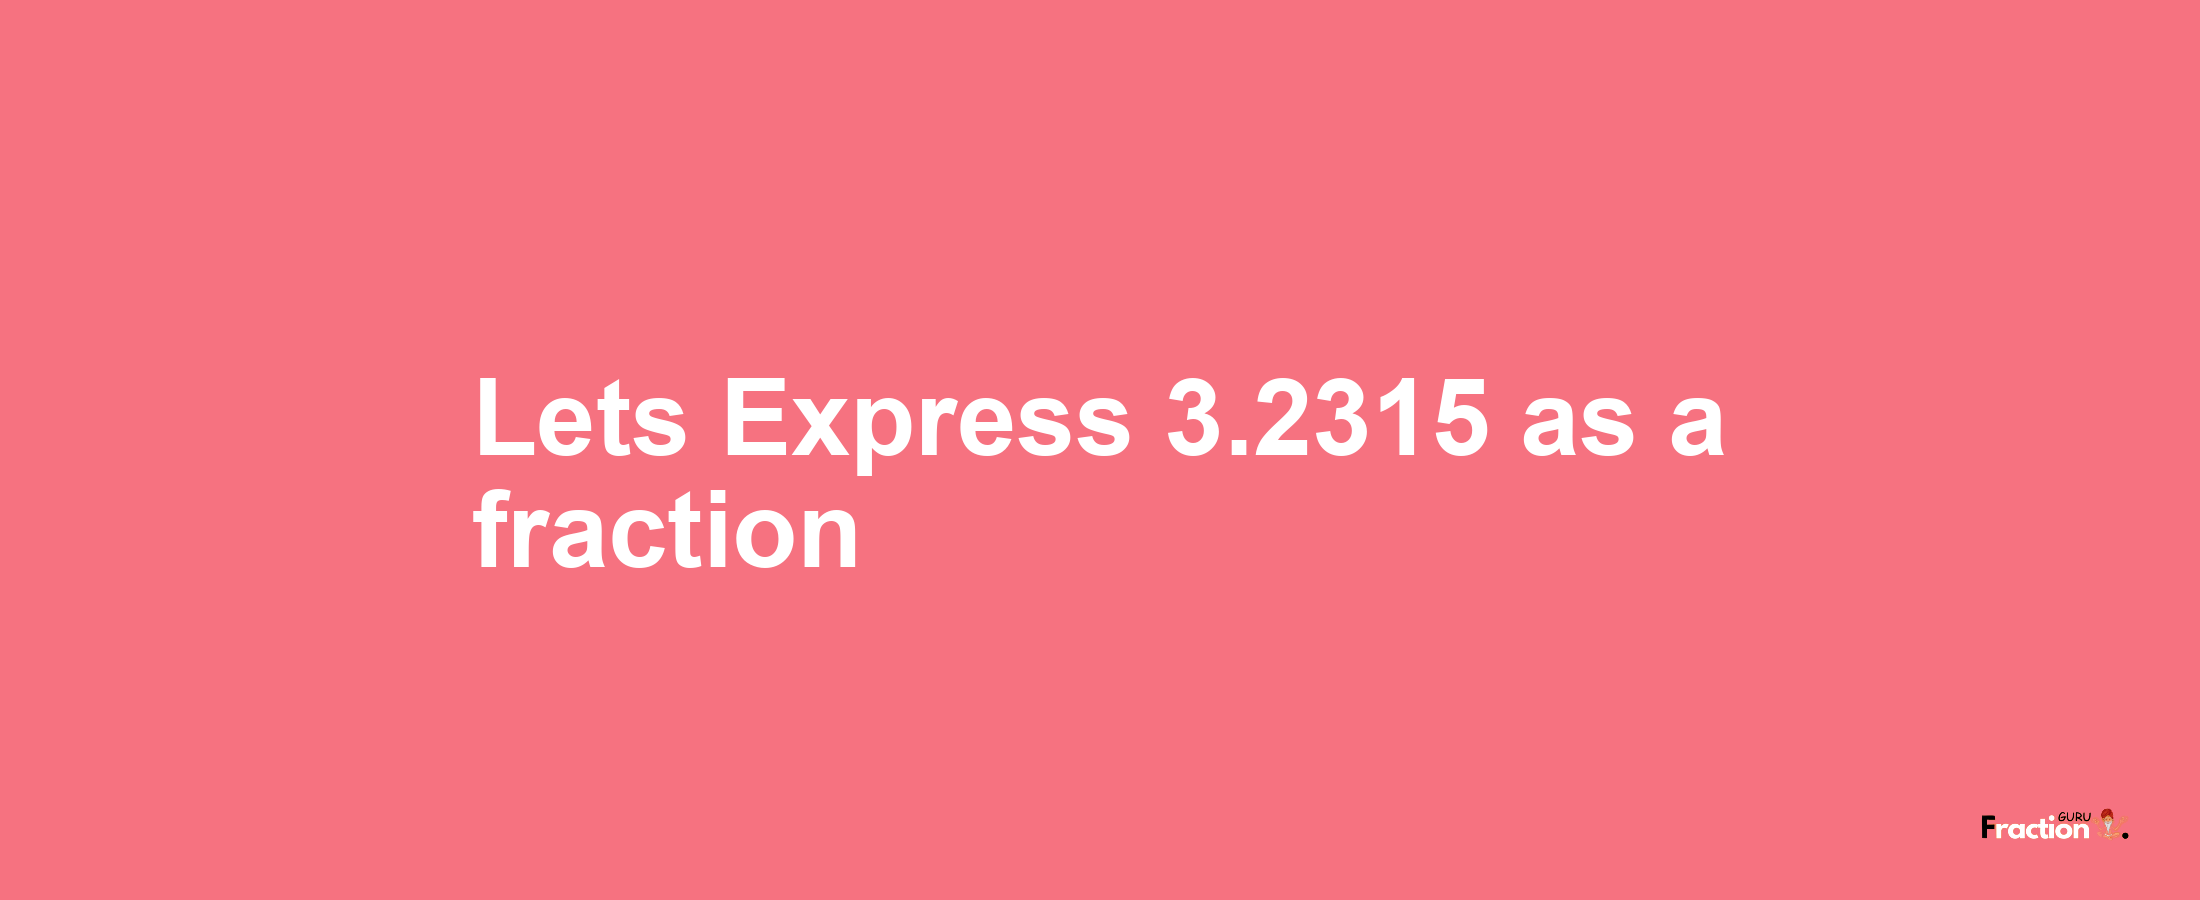 Lets Express 3.2315 as afraction